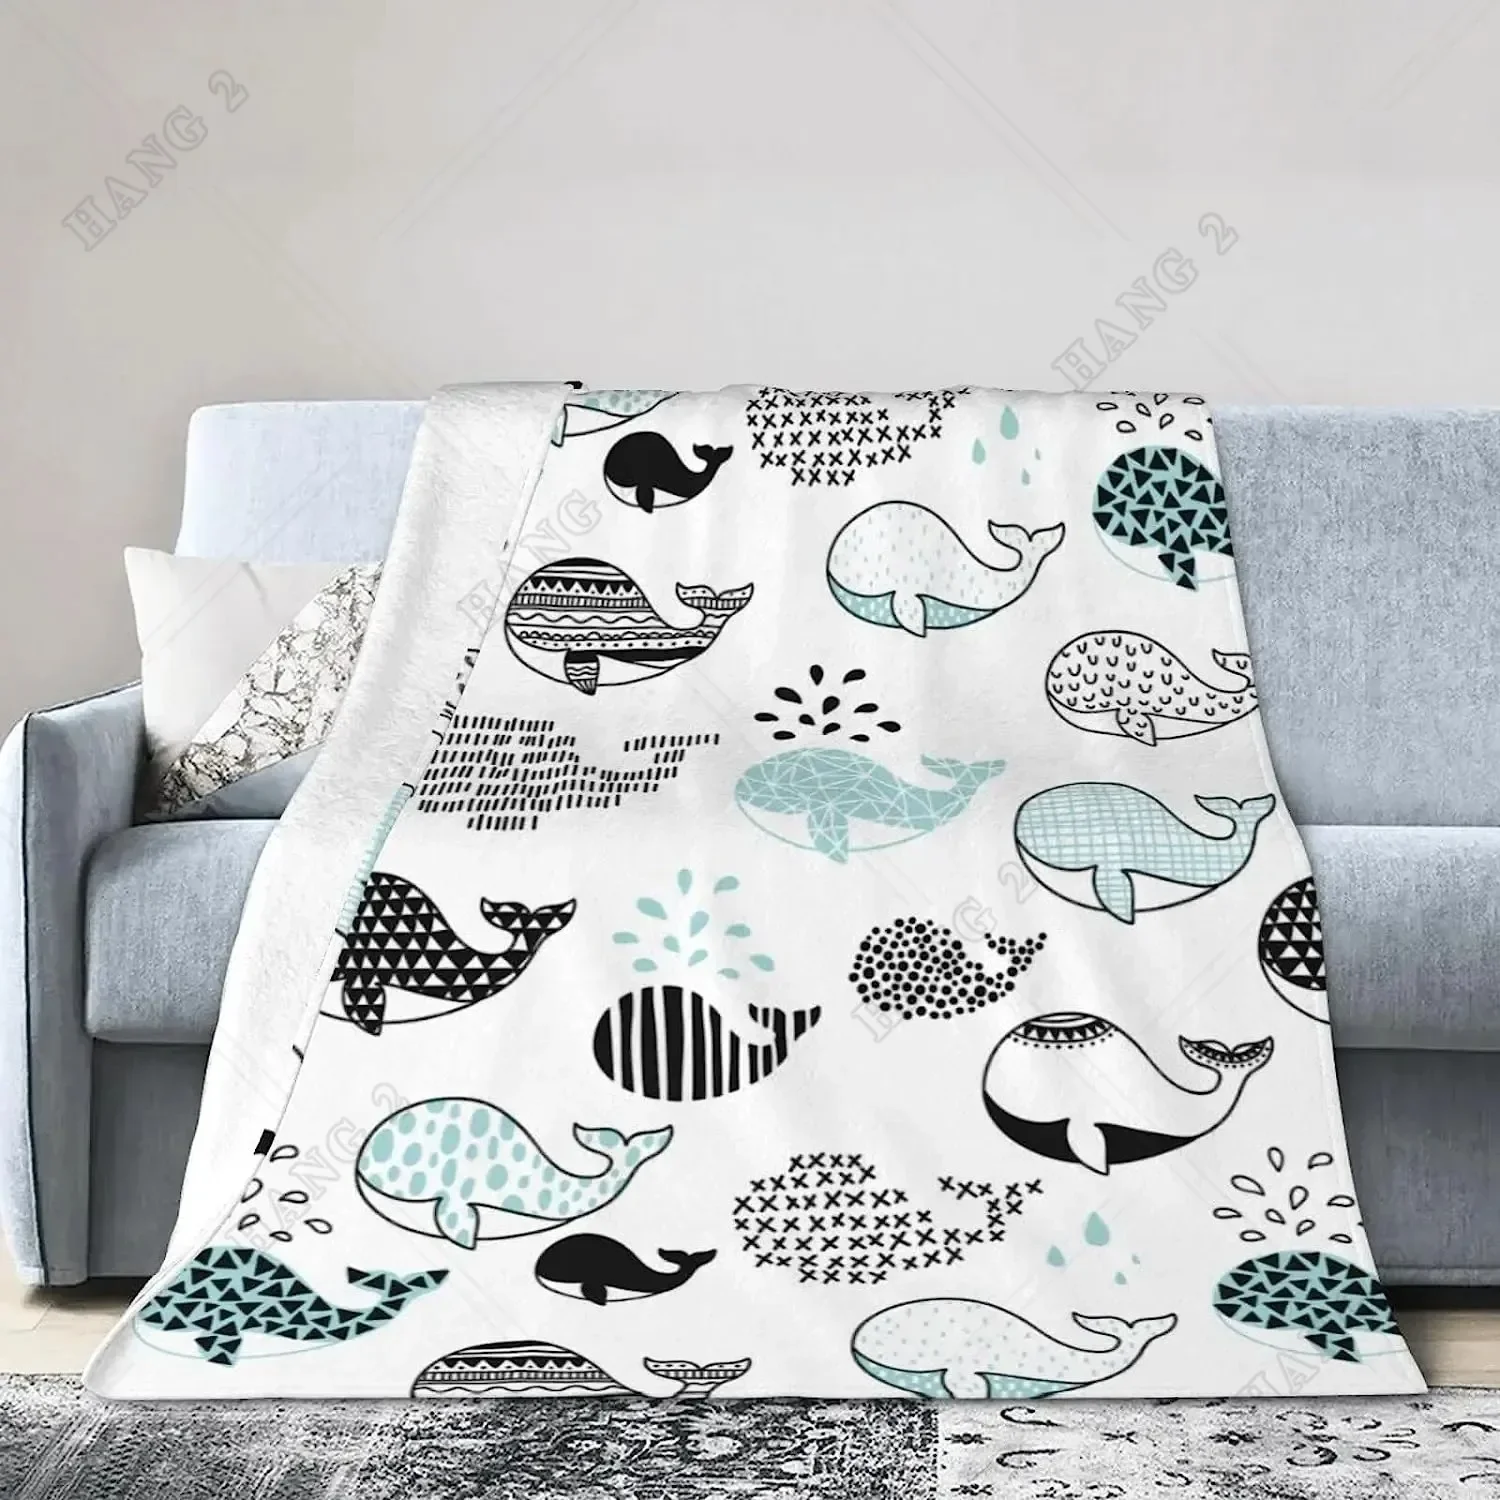 

Whale Cute Throw Blanket Super Soft Warm Bed Bedding Blankets for Couch Bedroom Sofa Office Car, All Season Cozy Flannel